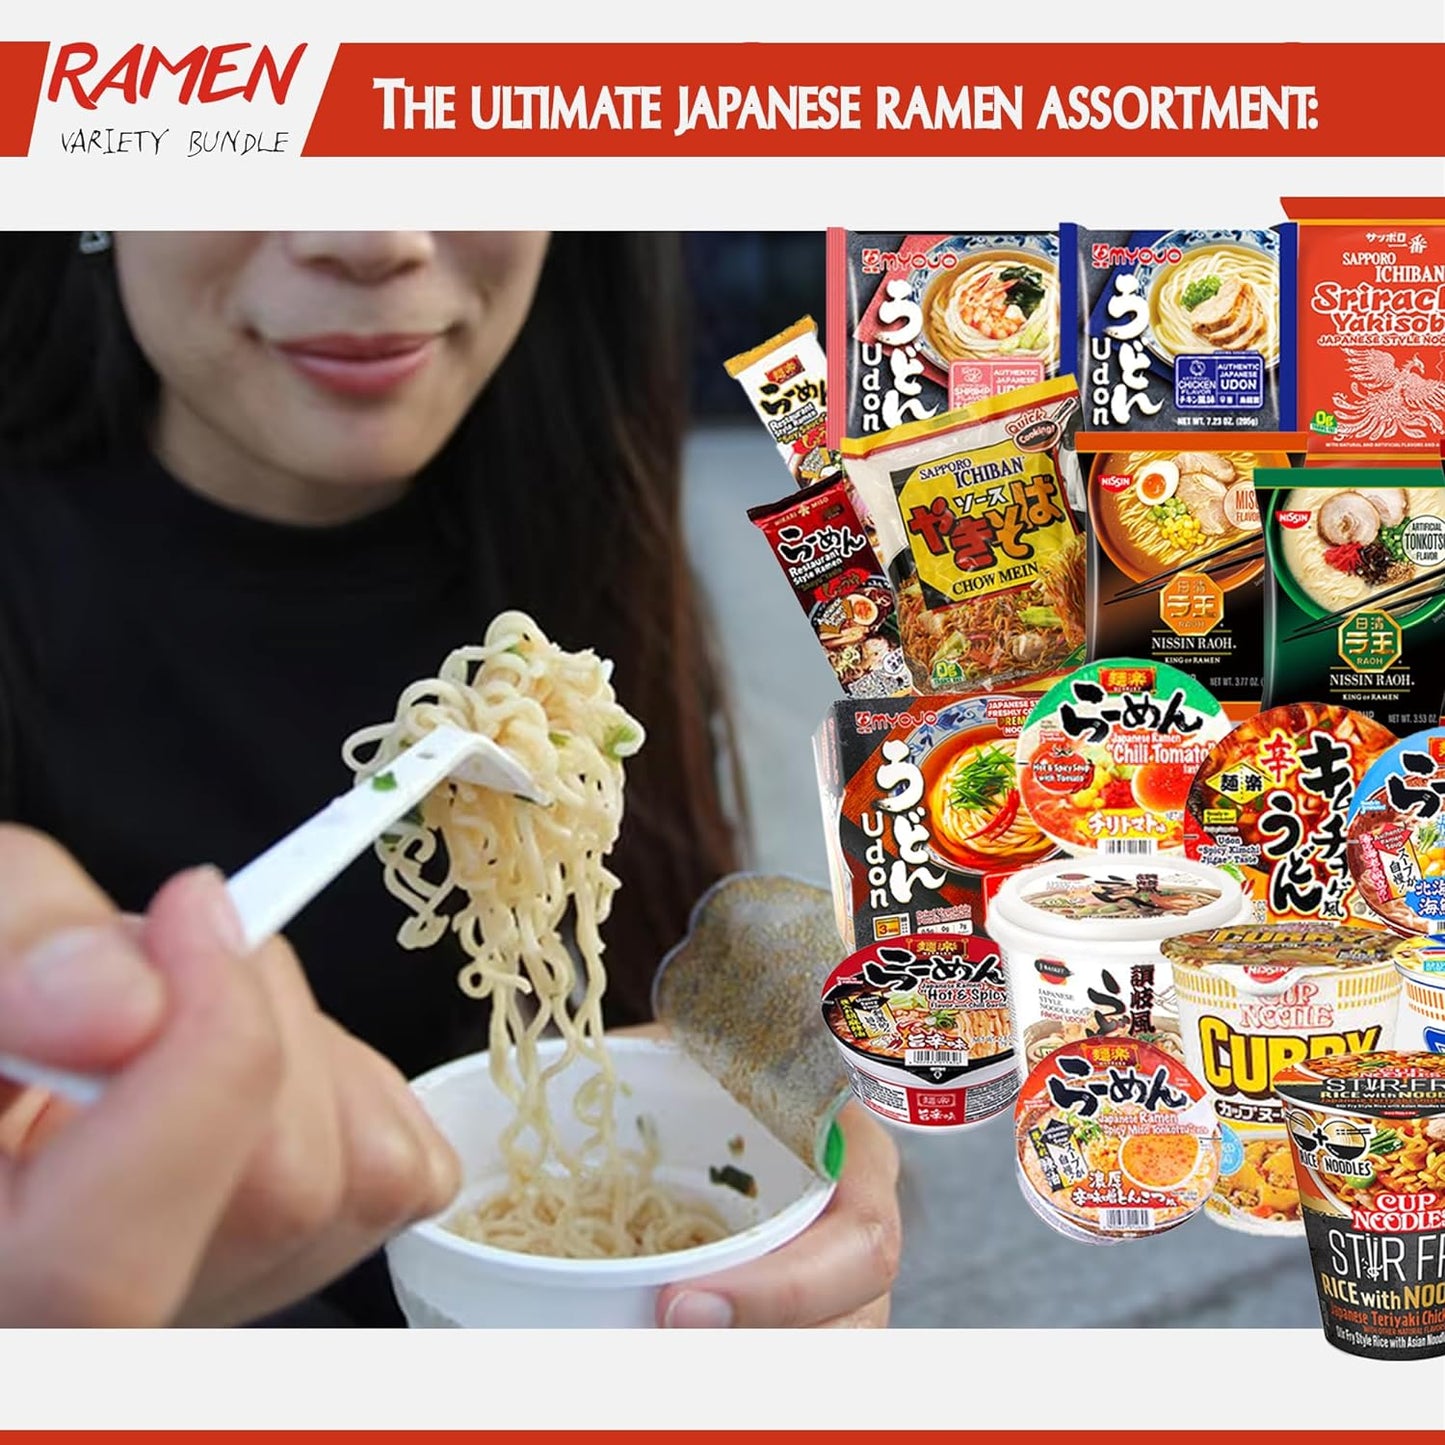 Japanese Instant Ramen Noodles Variety Boxx with Samyang Hot Sauce